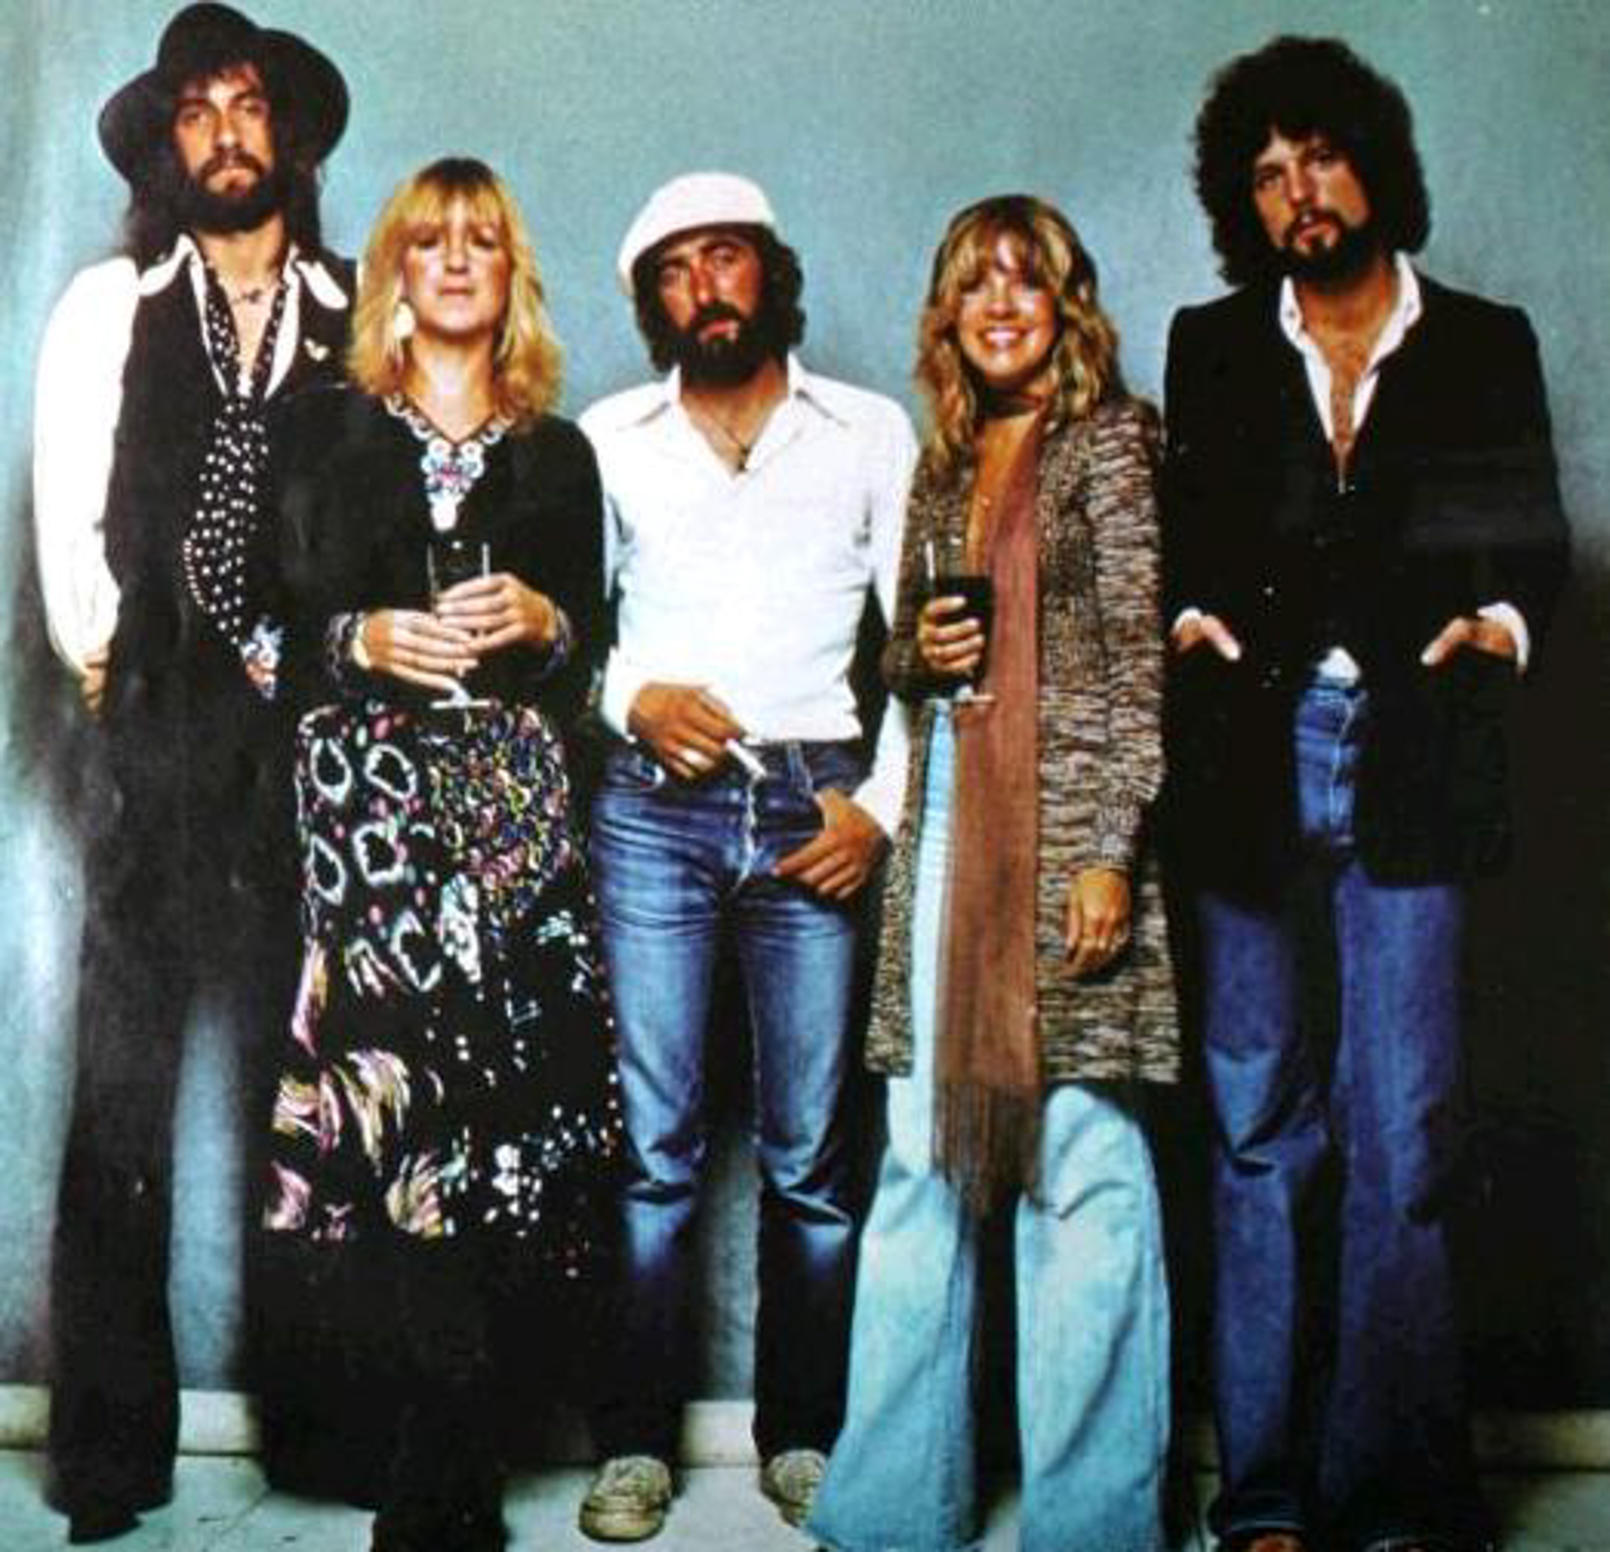 Fleetwood Mac in 1977 - the year Rumours was released